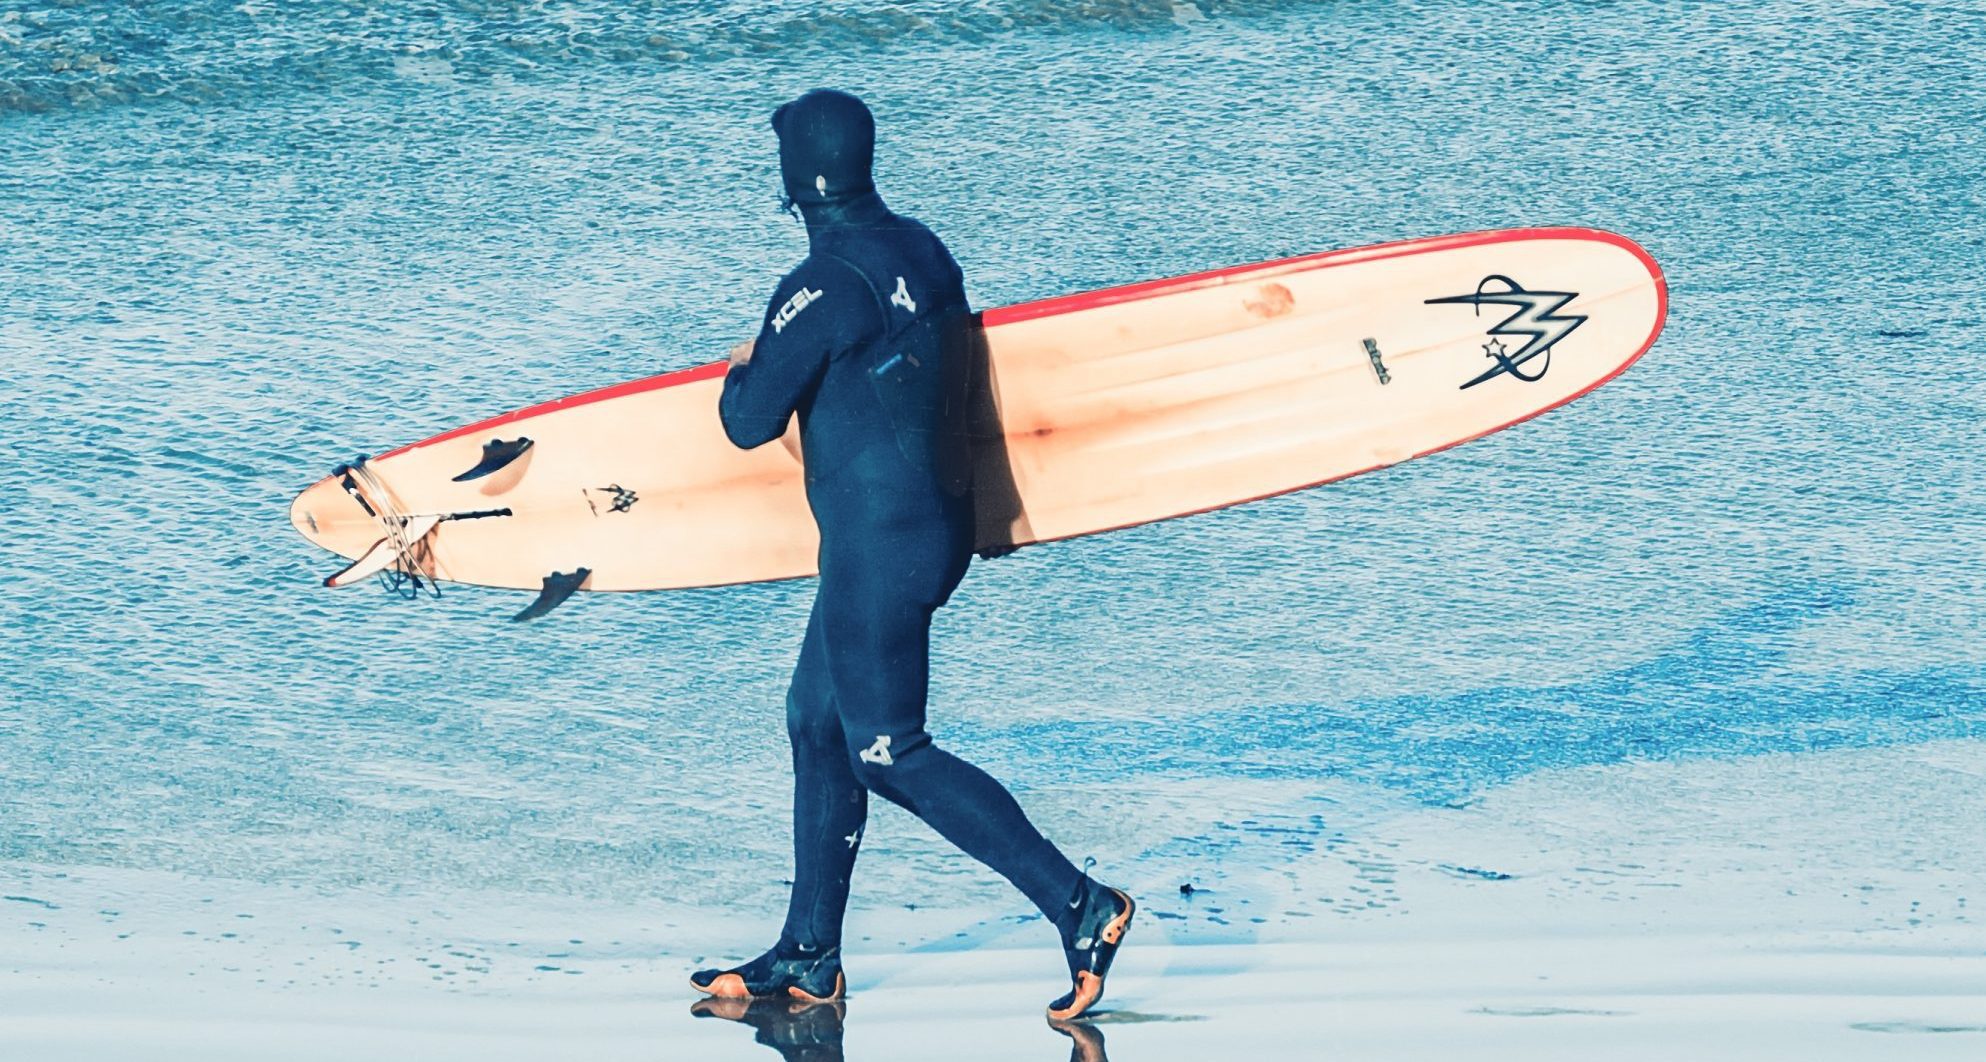 6 life-saving tips to survive the cold water while surfing in winter ...